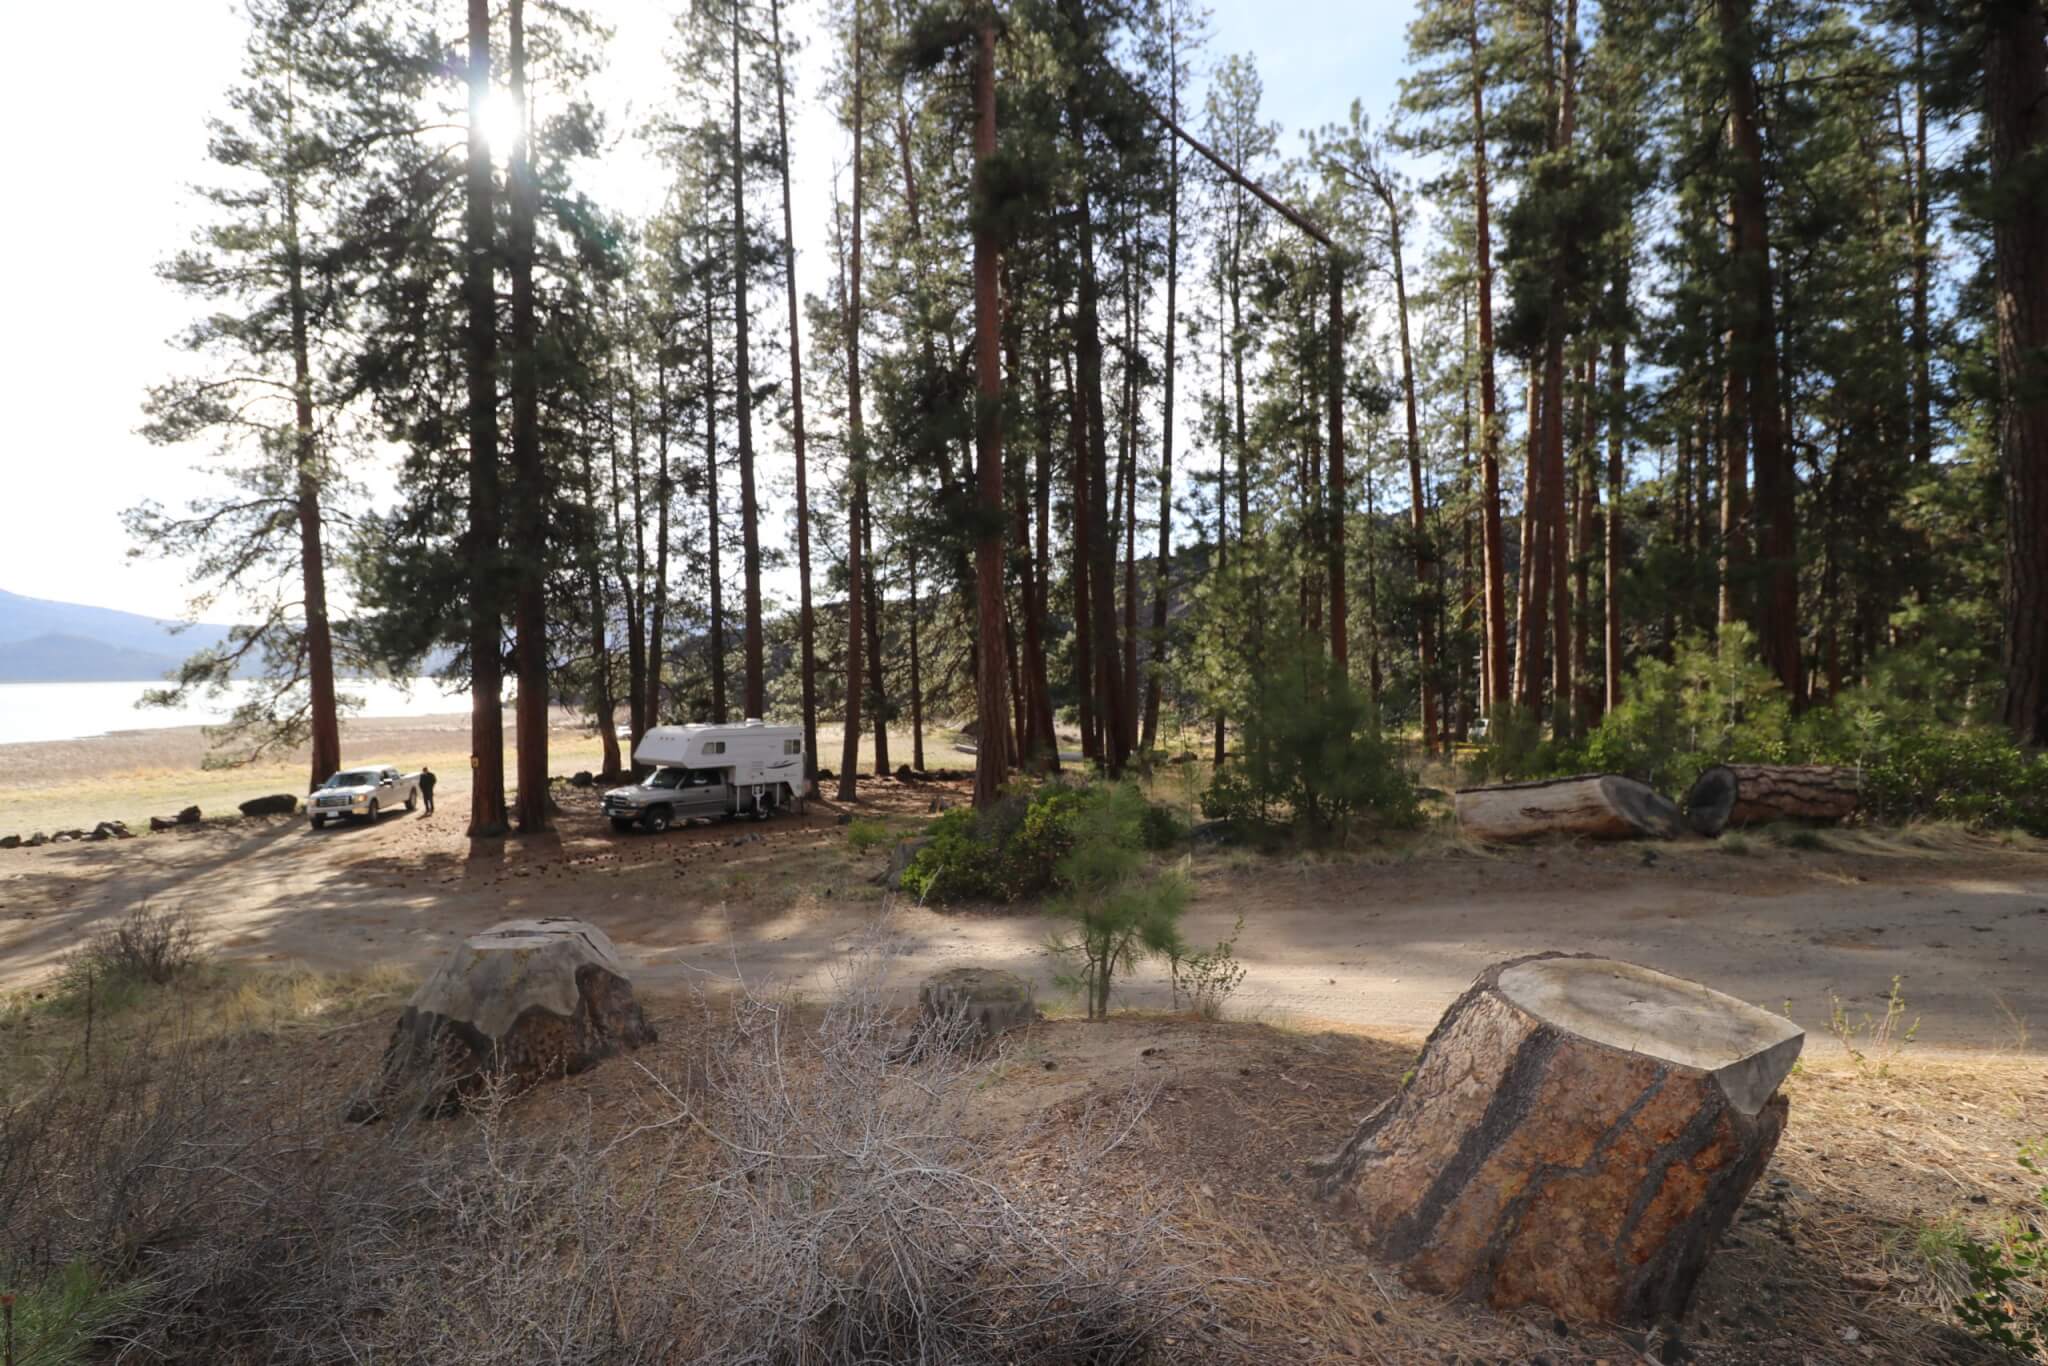 Awesome Campgrounds in the Pacific Northwest and Northern California-Lava Flow Campground View